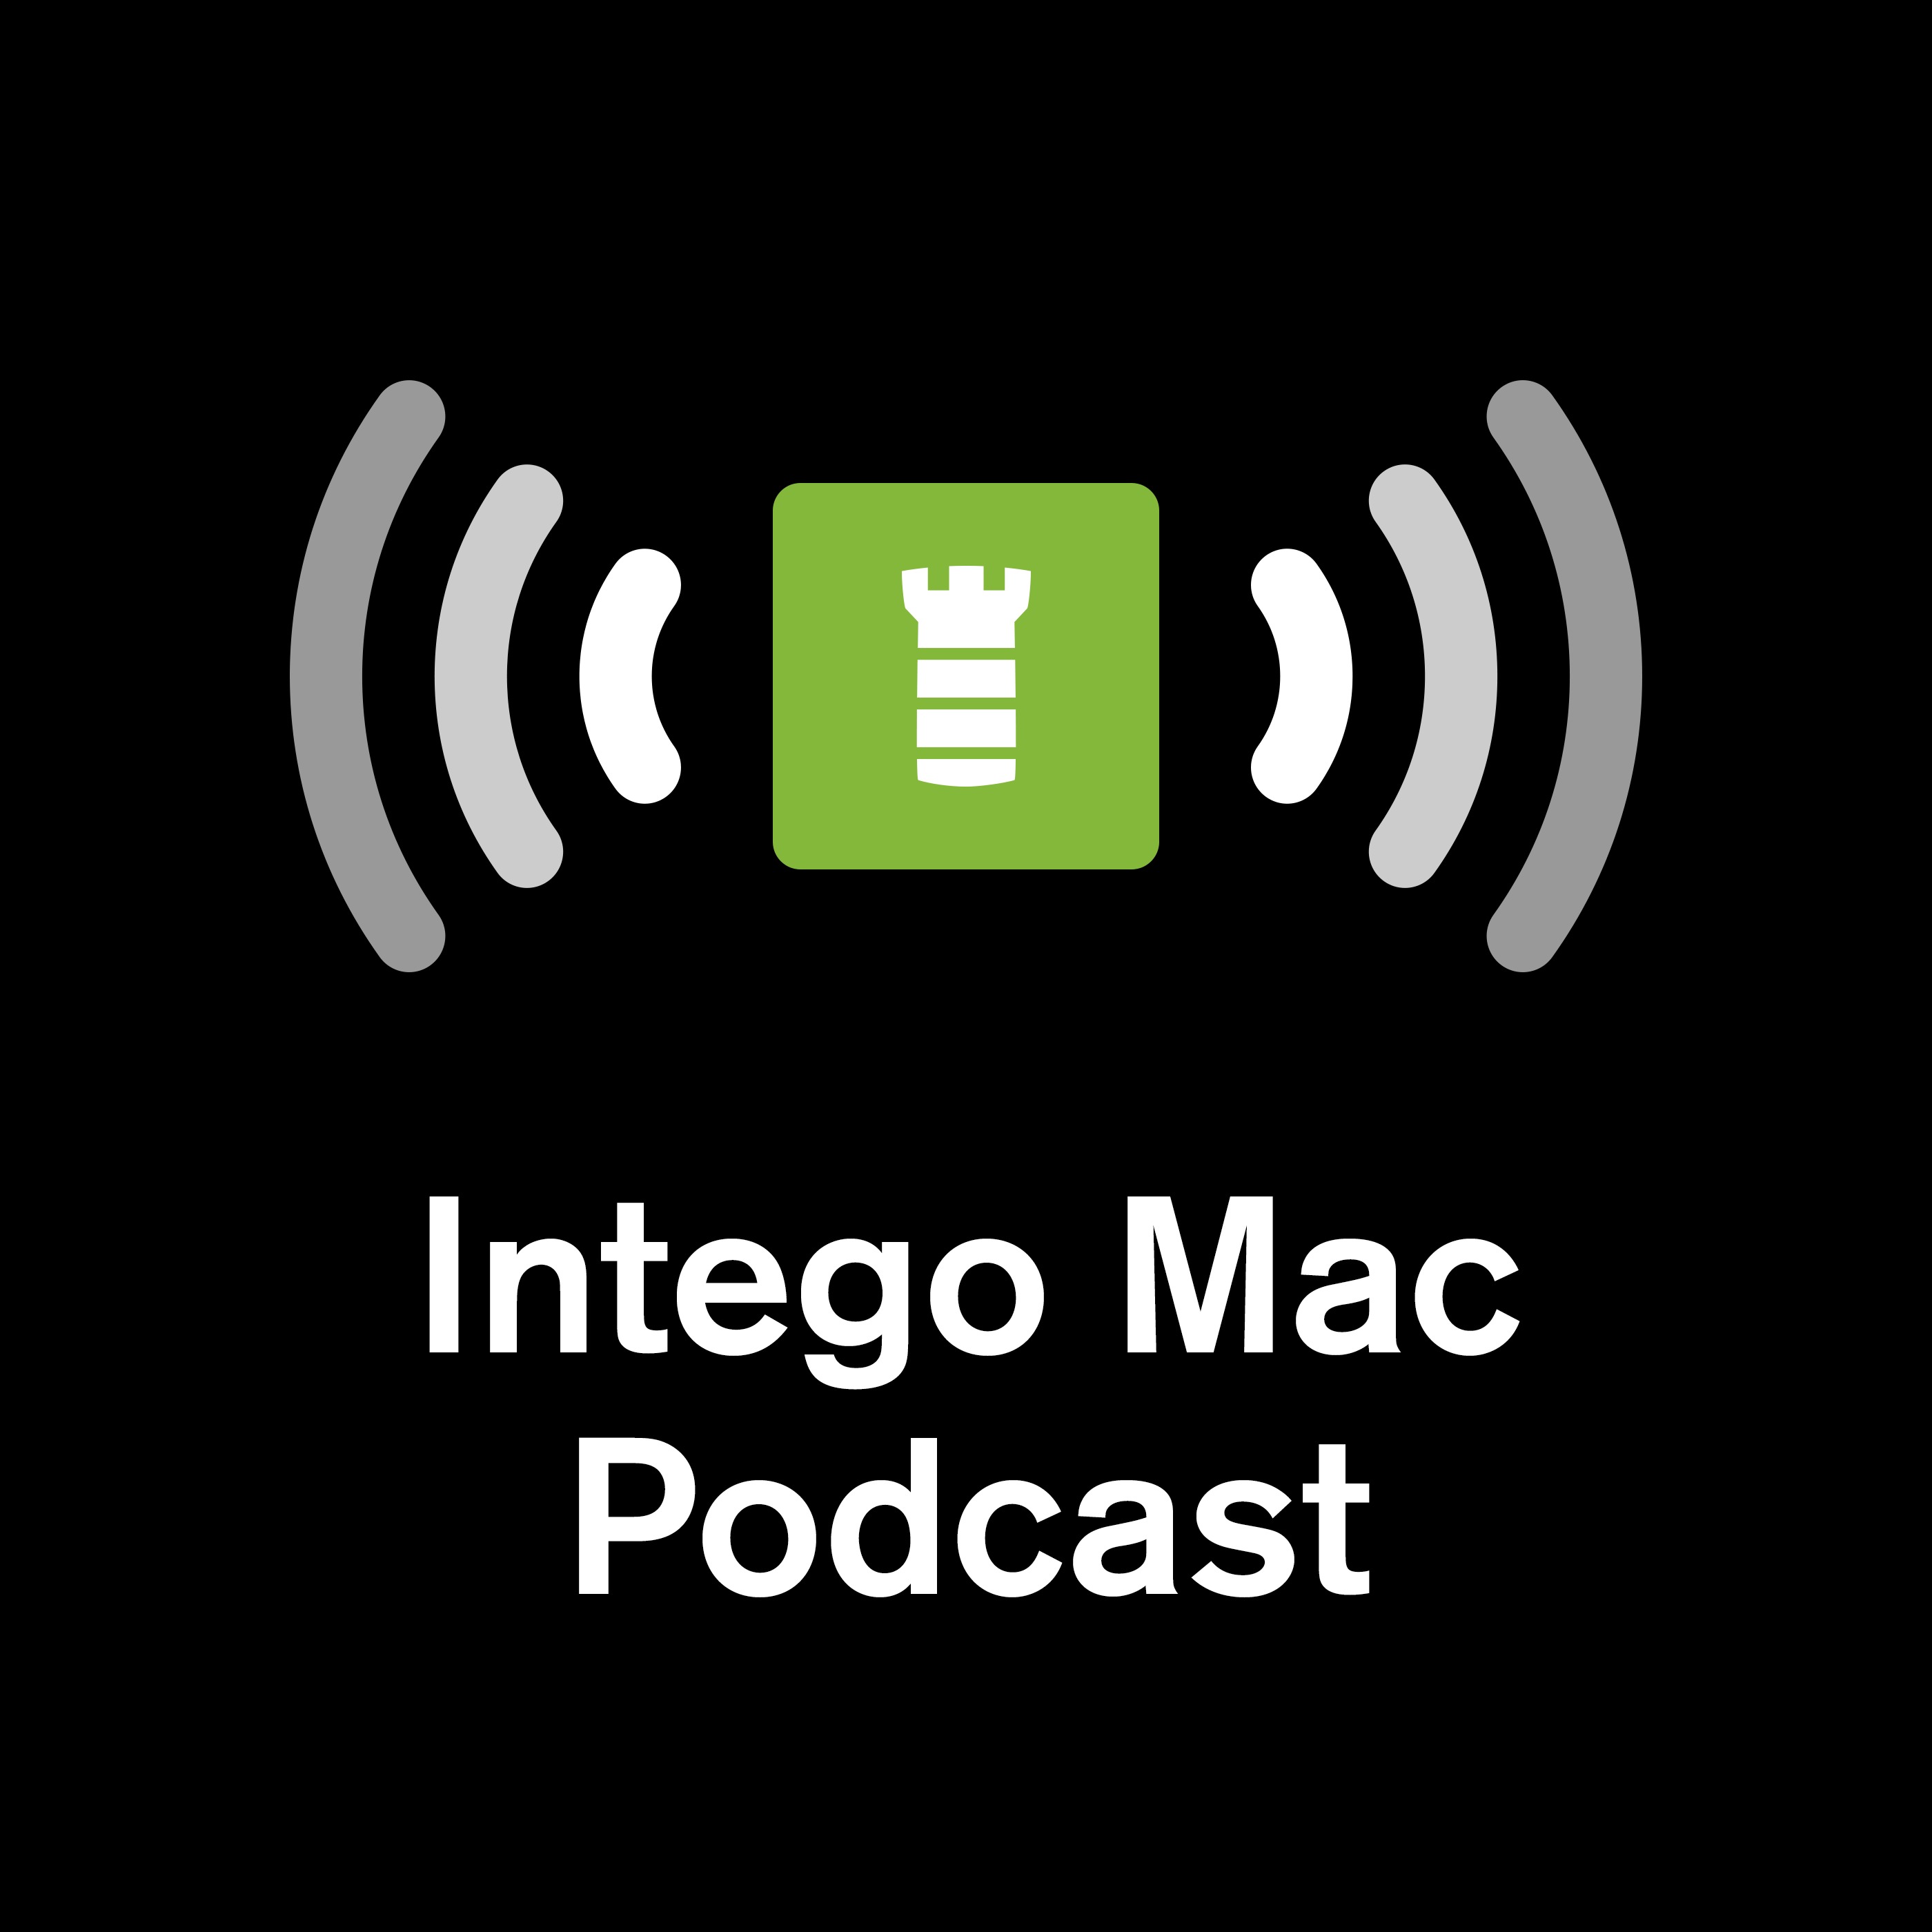 Episode 227: Apple Vulns, Macro Viruses, and How Encryption Protects You